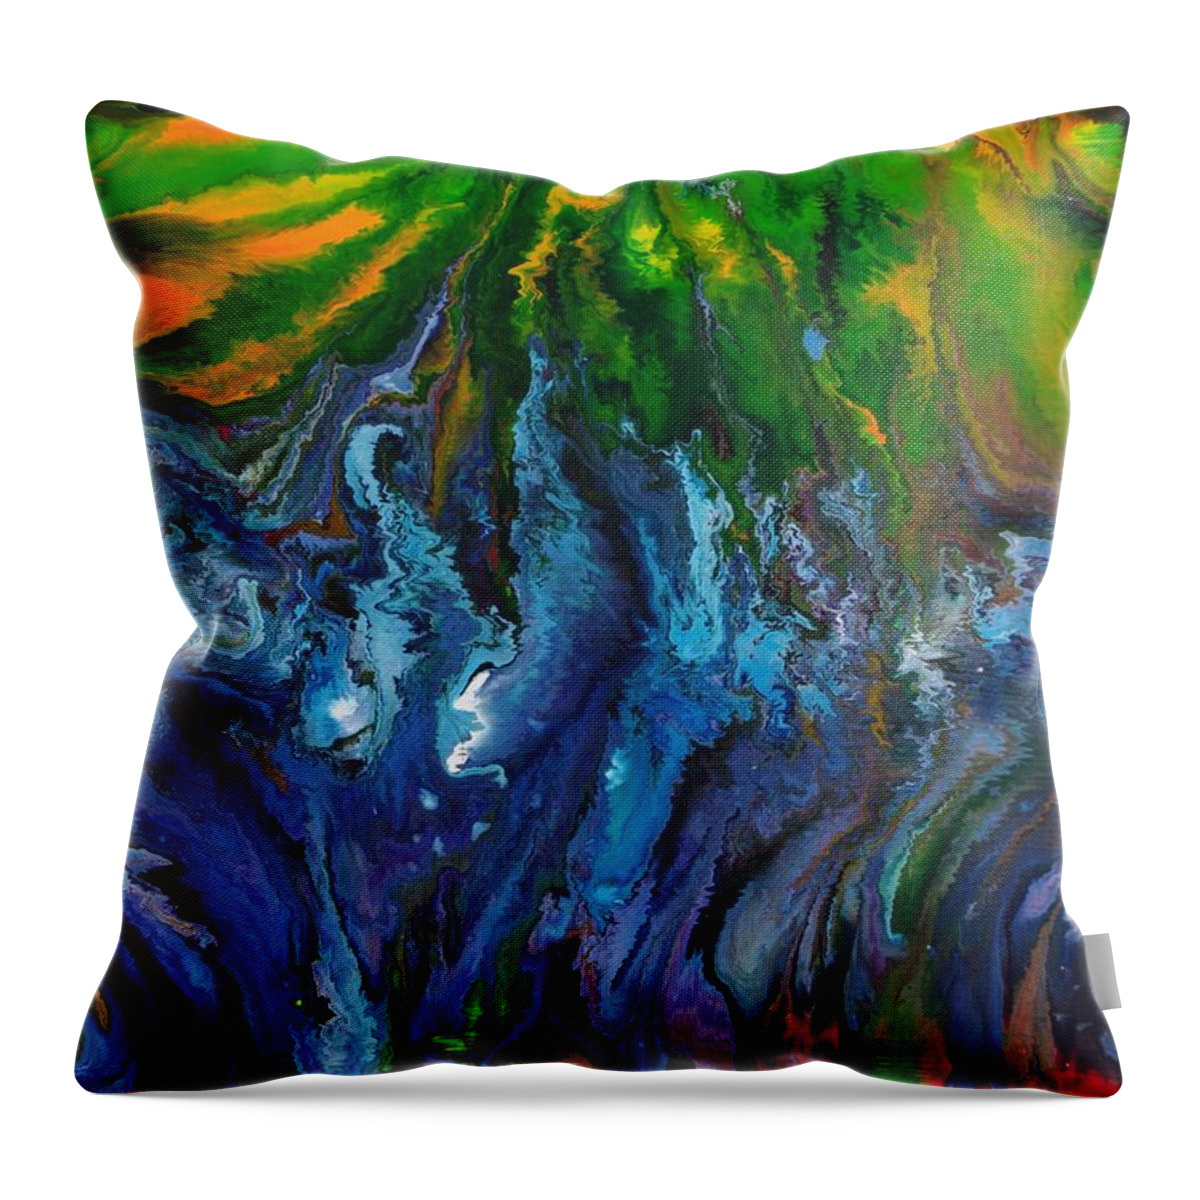 Zigzags Throw Pillow featuring the painting Flow by Lori Kingston